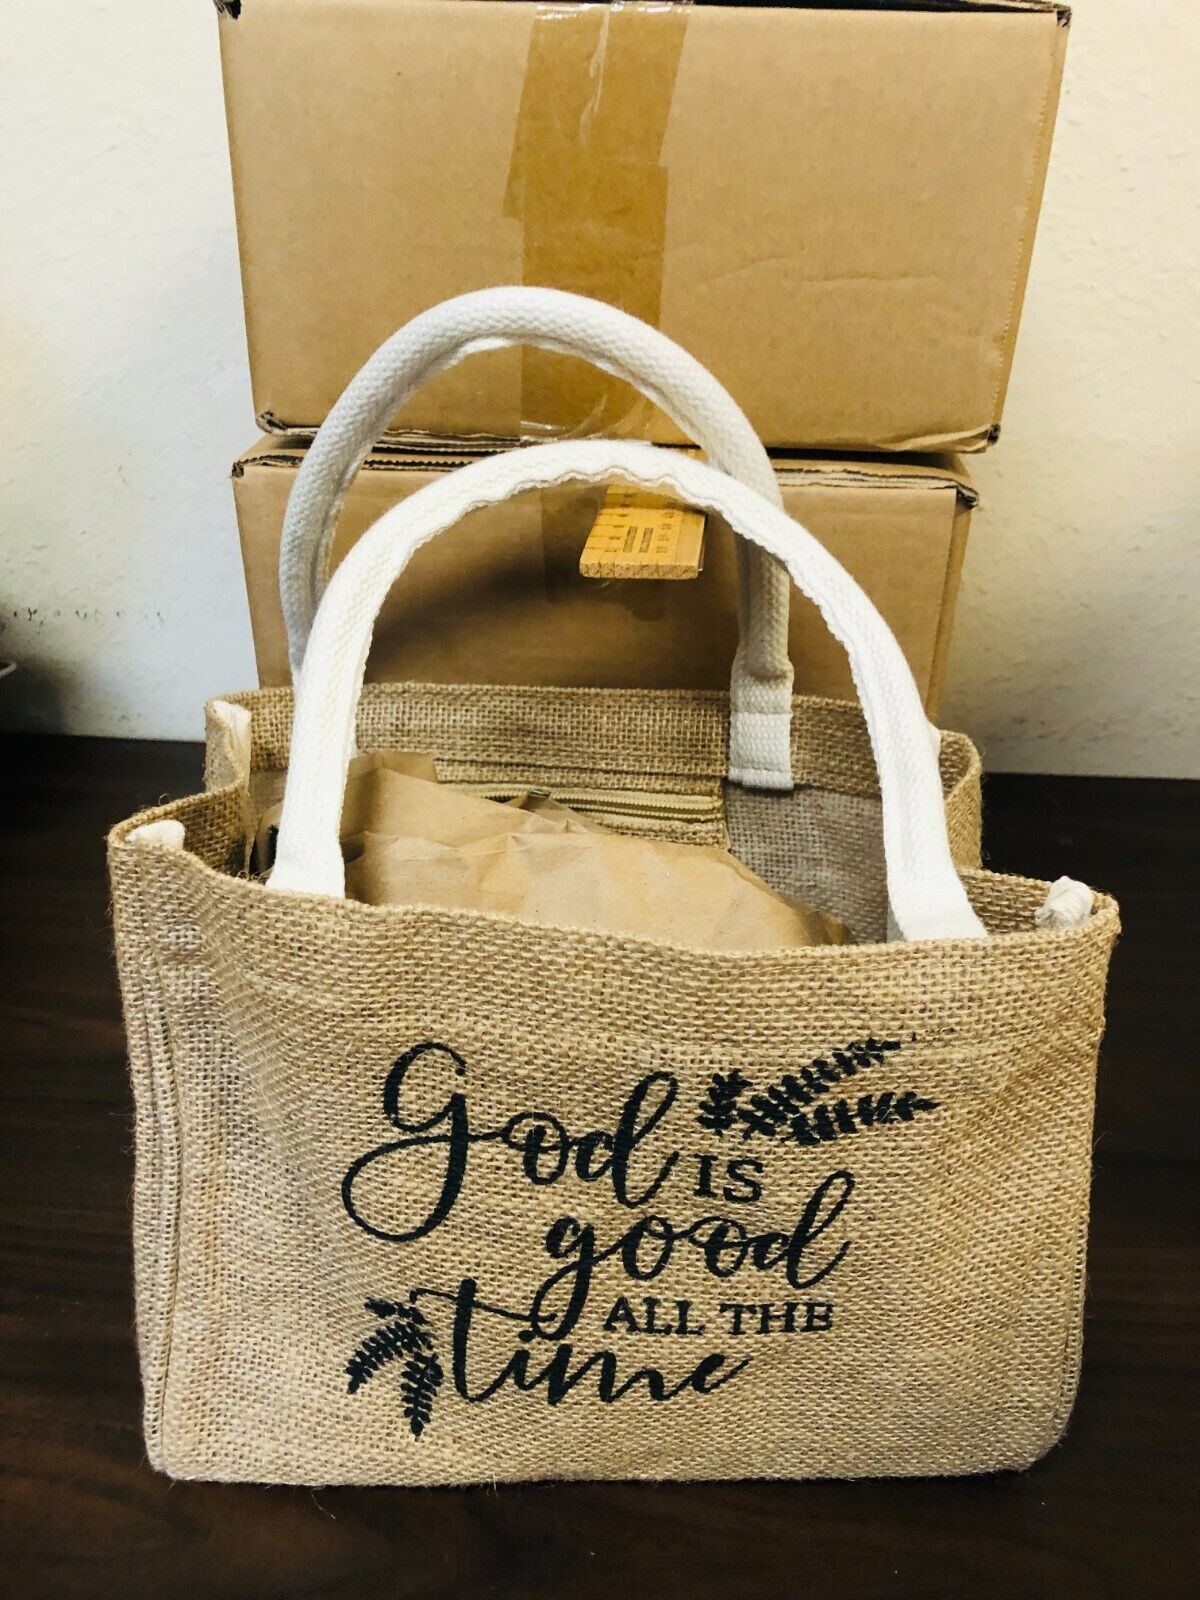 Jute small Tote, "God is good all the time", 10"x 7.5", New - Bob and Penny Lord